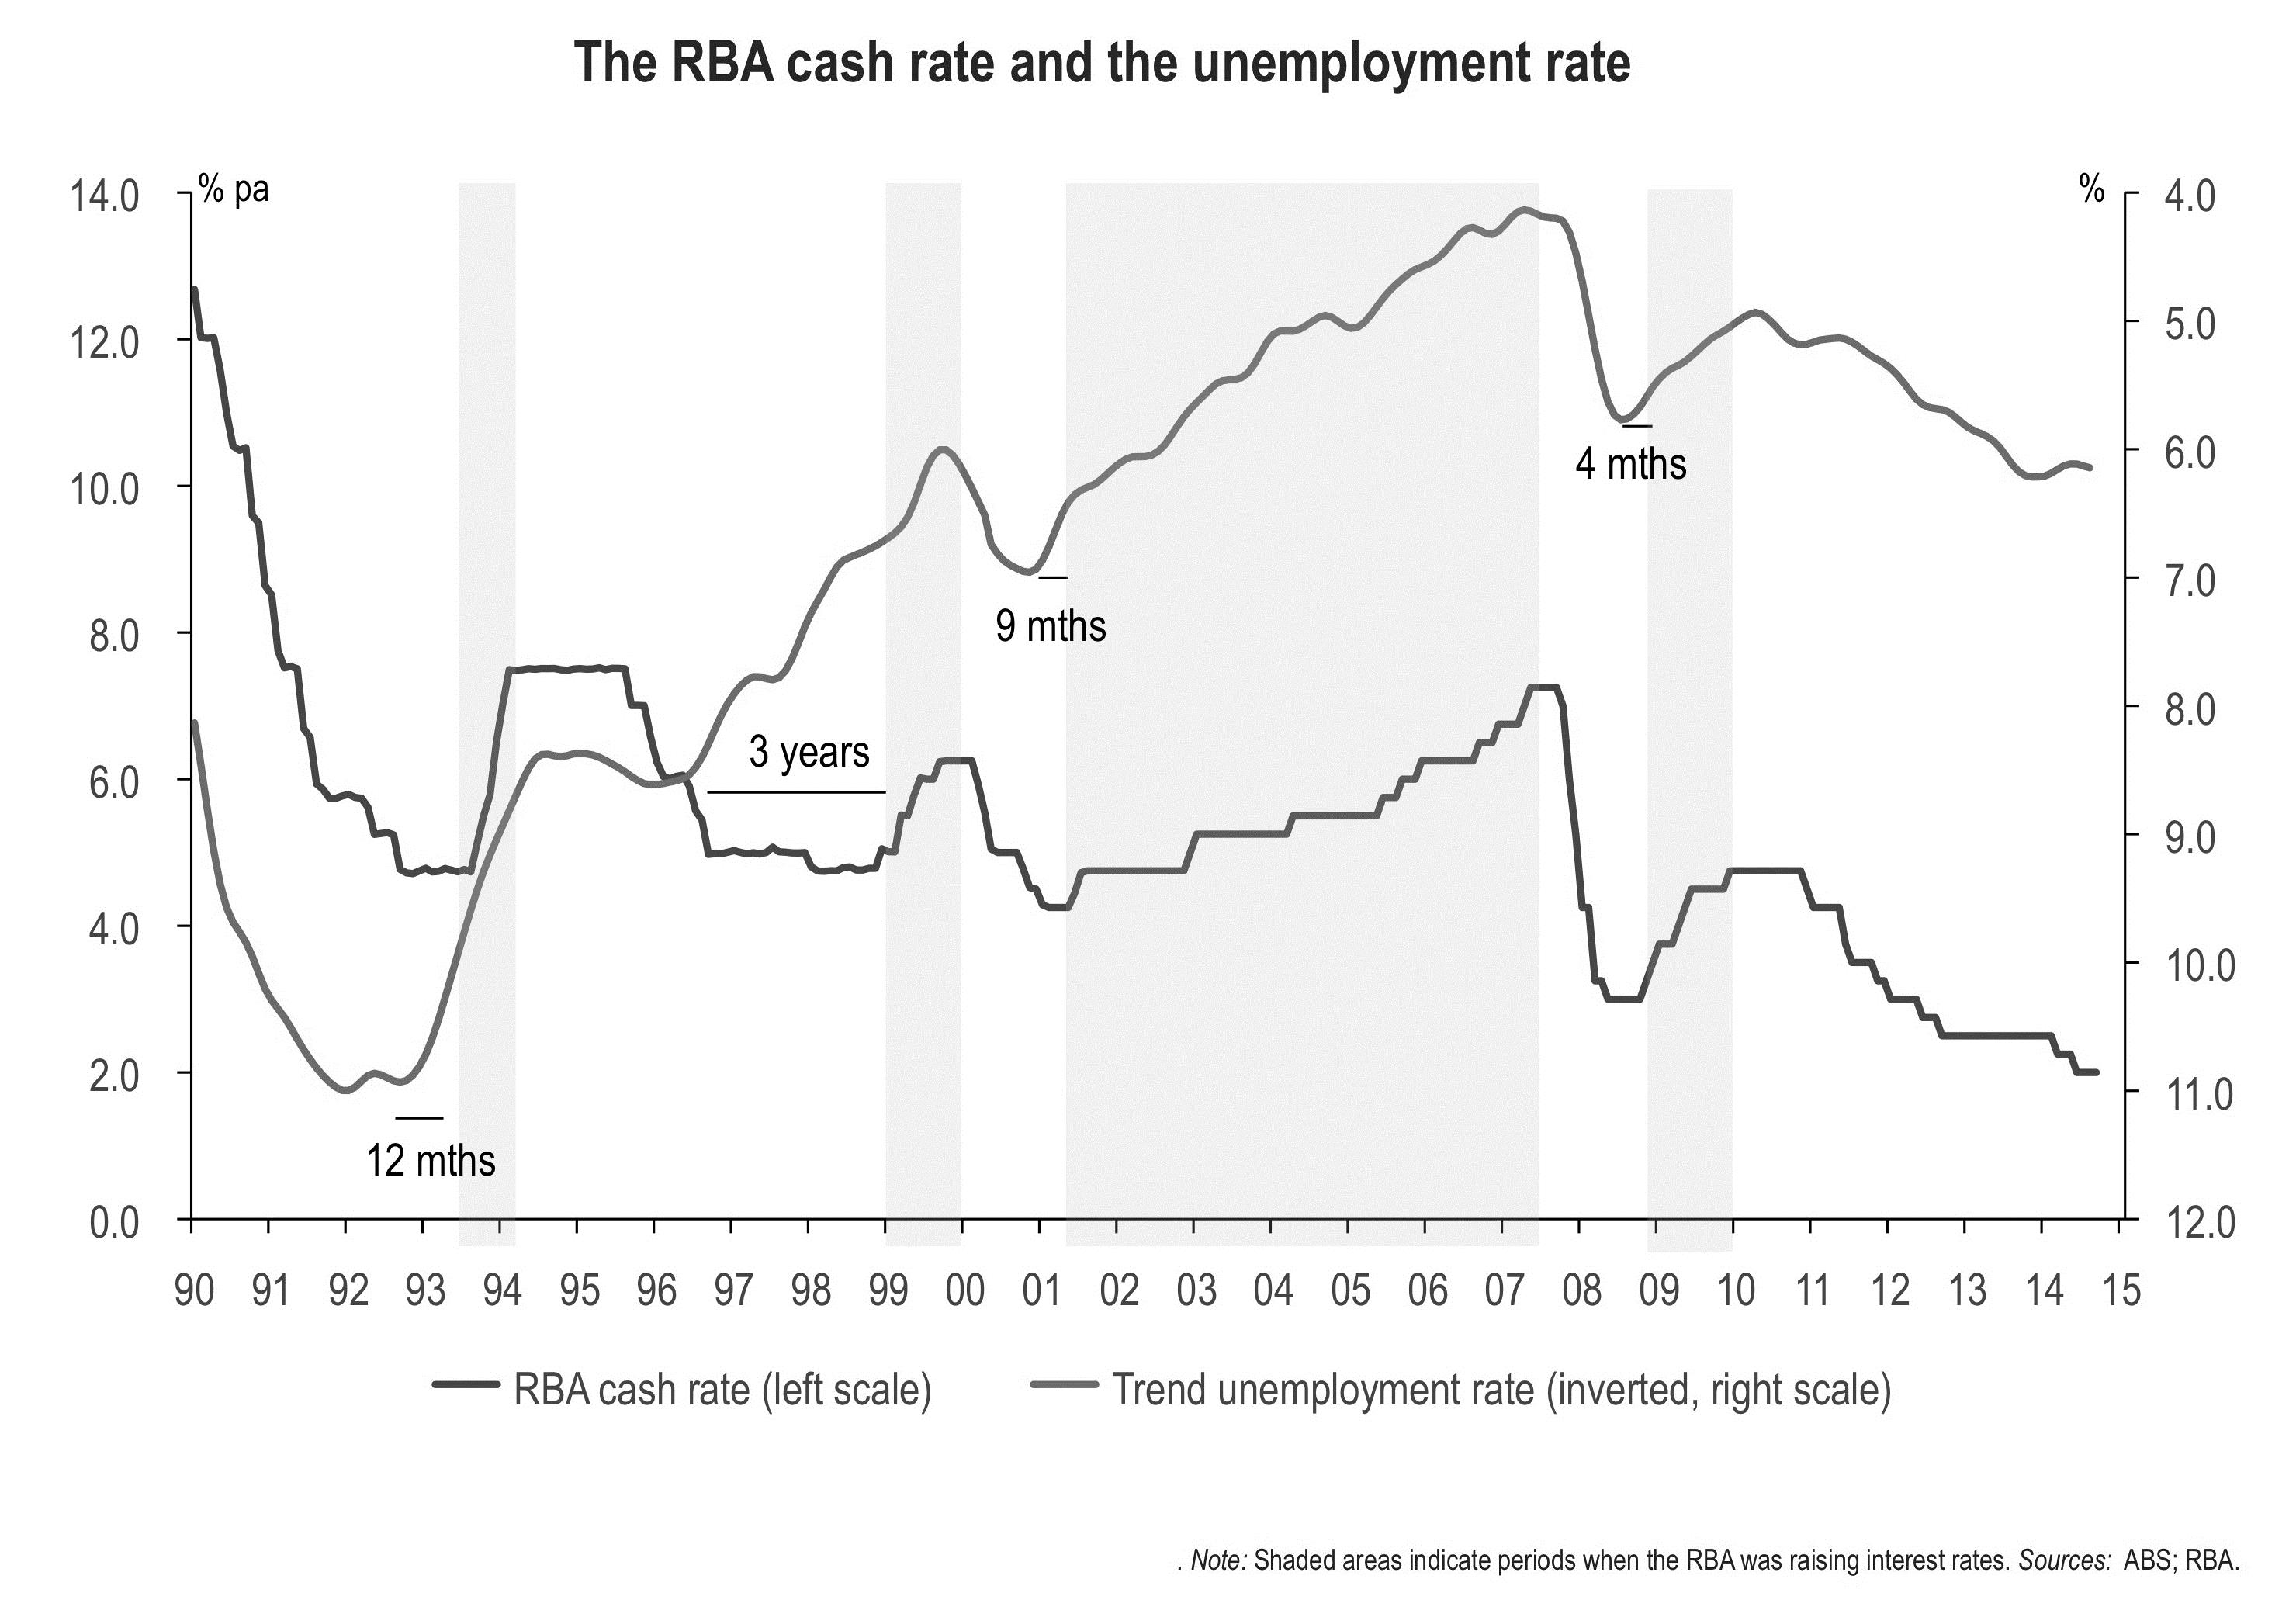 Figure 25: The RBA cash rate and the unemployment rate.